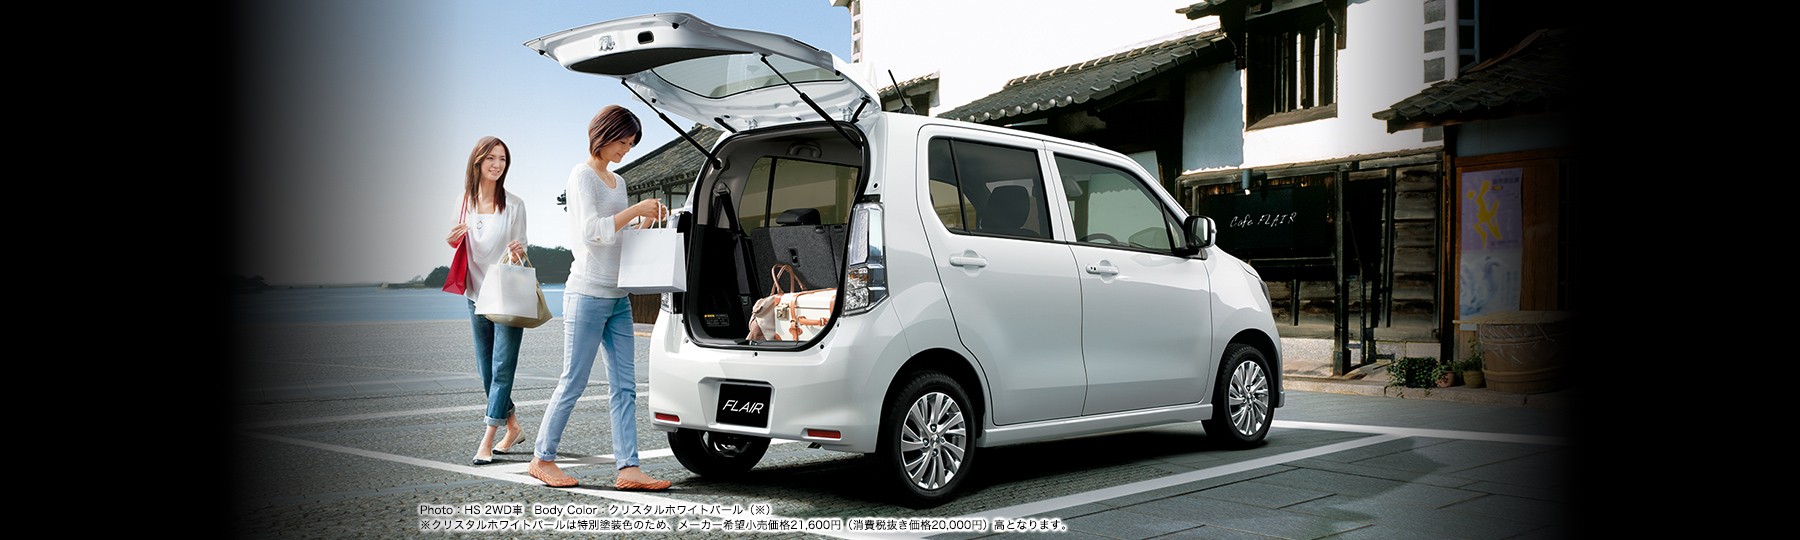 2015 Mazda Flair is a Kei Car With Plenty of It - Video ...